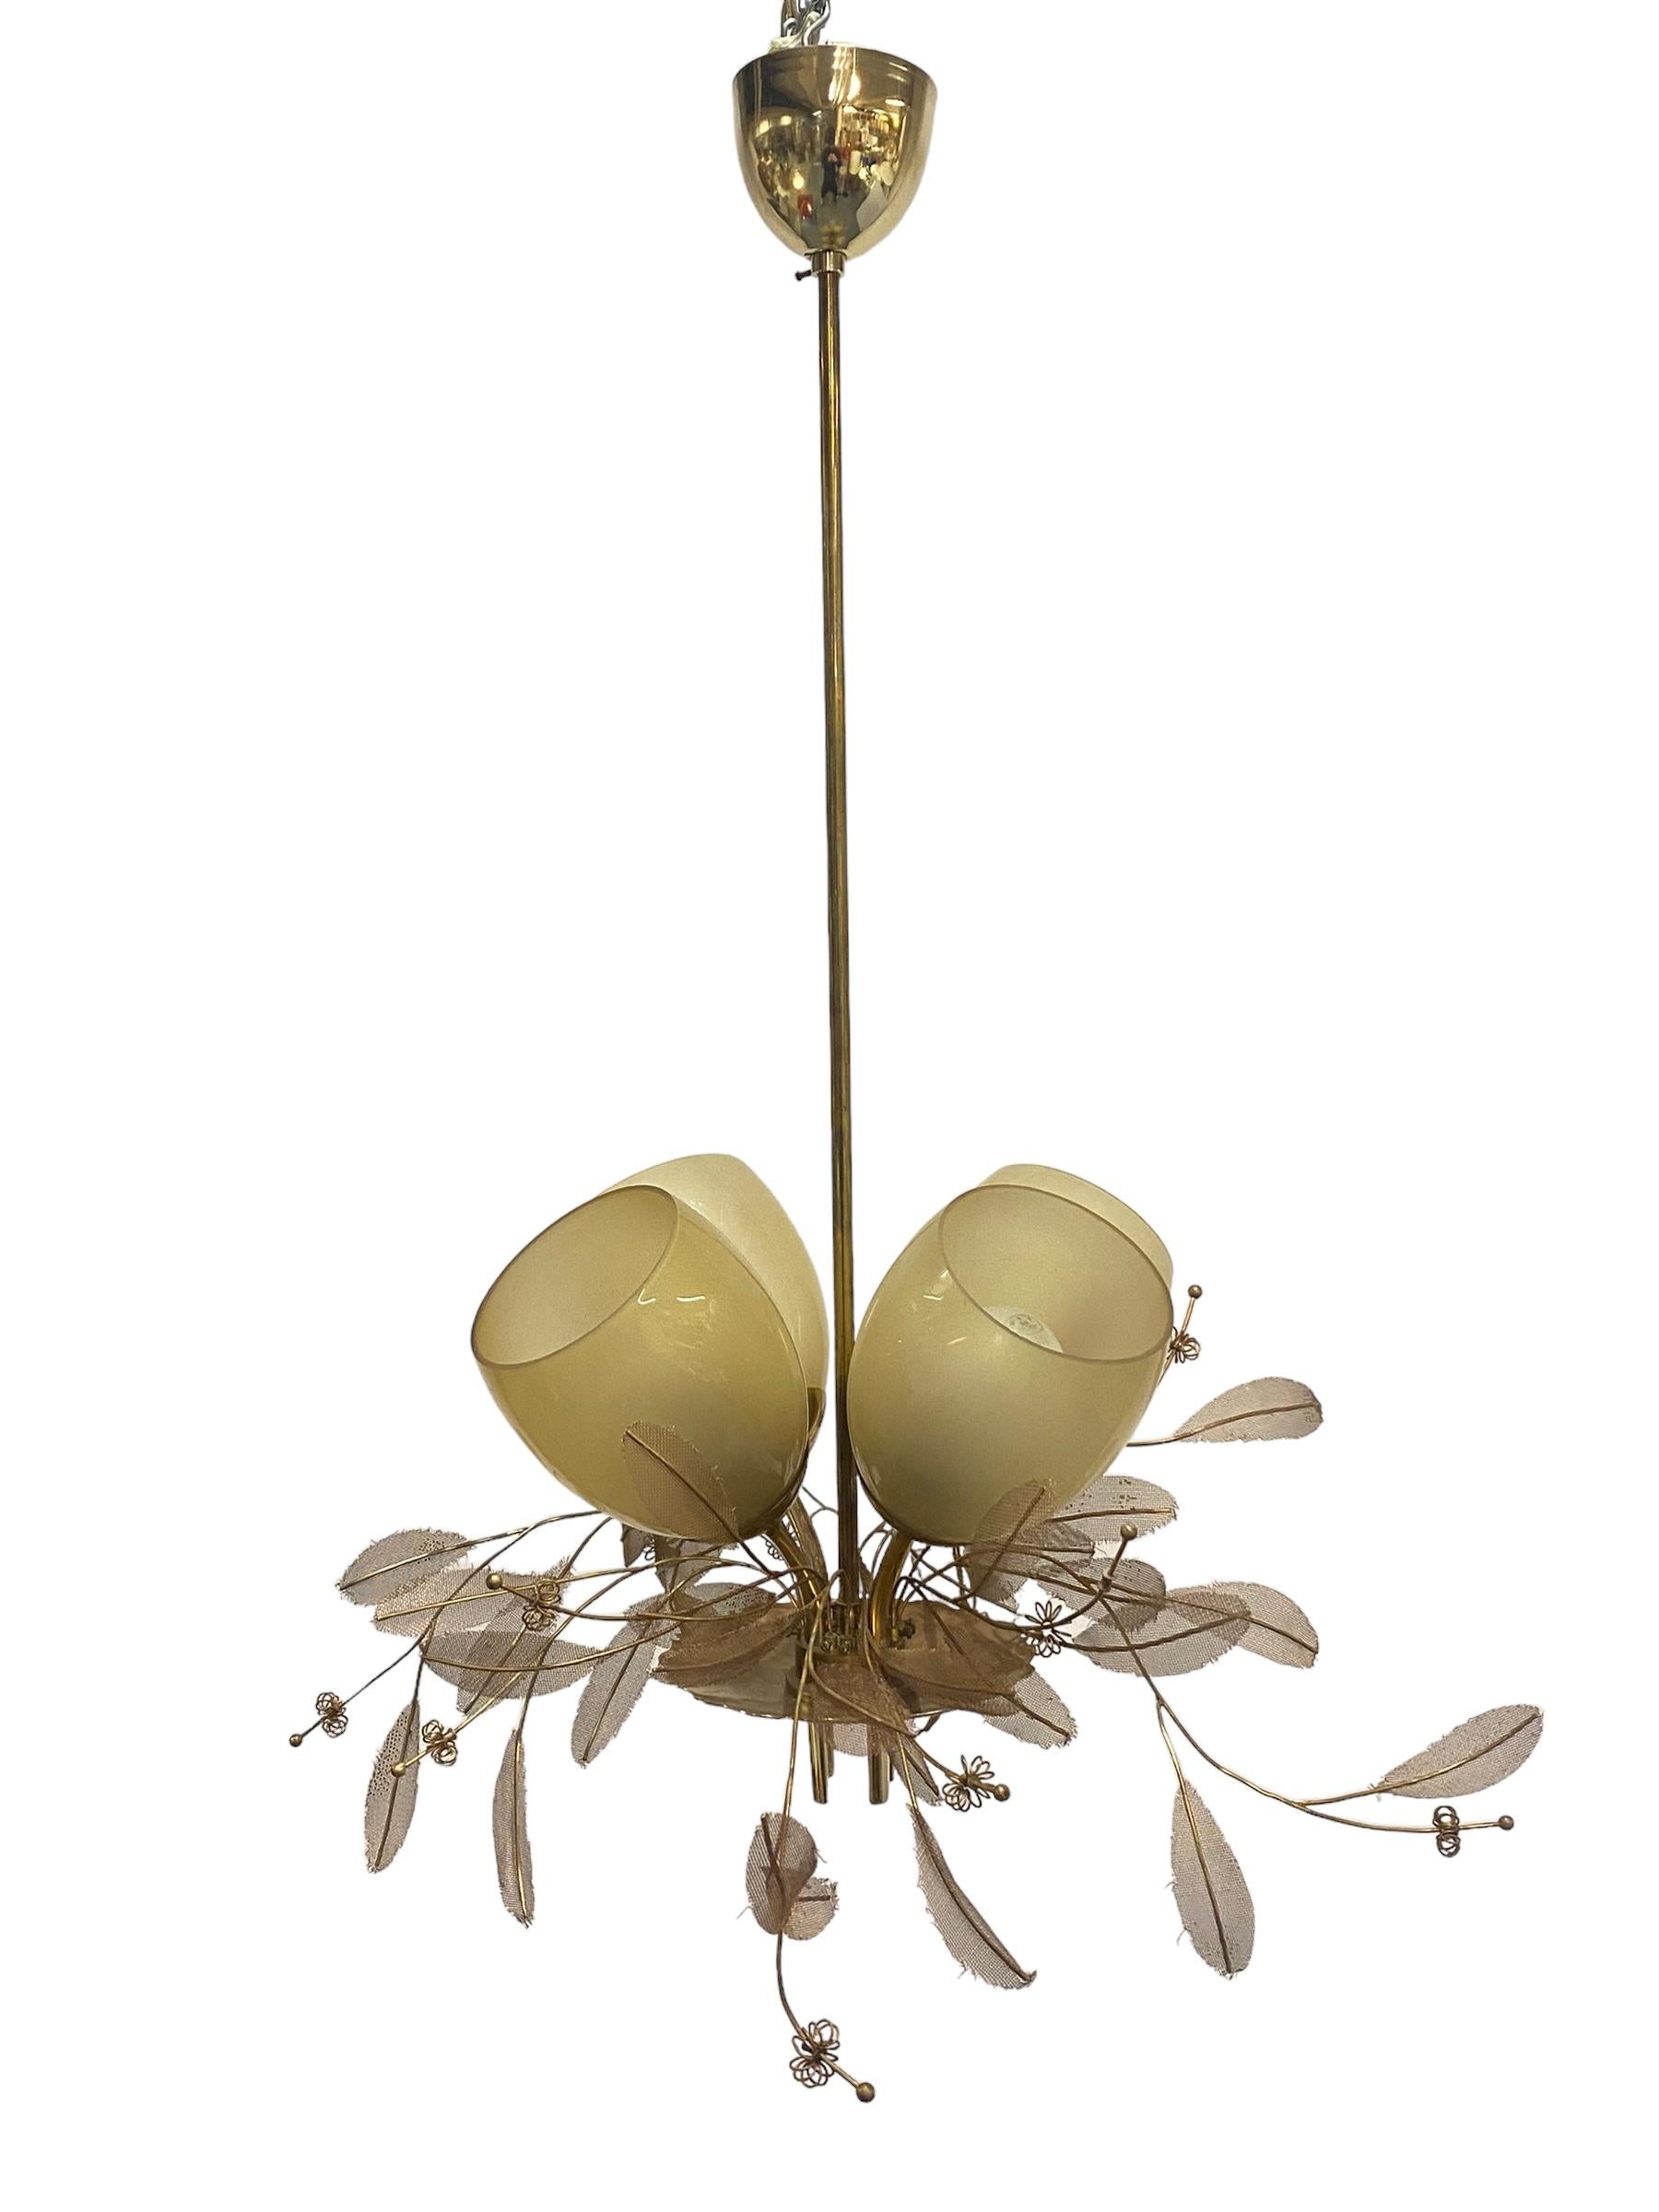 The absolutely beautiful and classic 9029 chandelier designed by Paavo Tynell and manufactured by Taito Oy in Finland in the 1950s. The model 9029 comes in various different sizes, this particular one is the one with four shades. Some refer to the